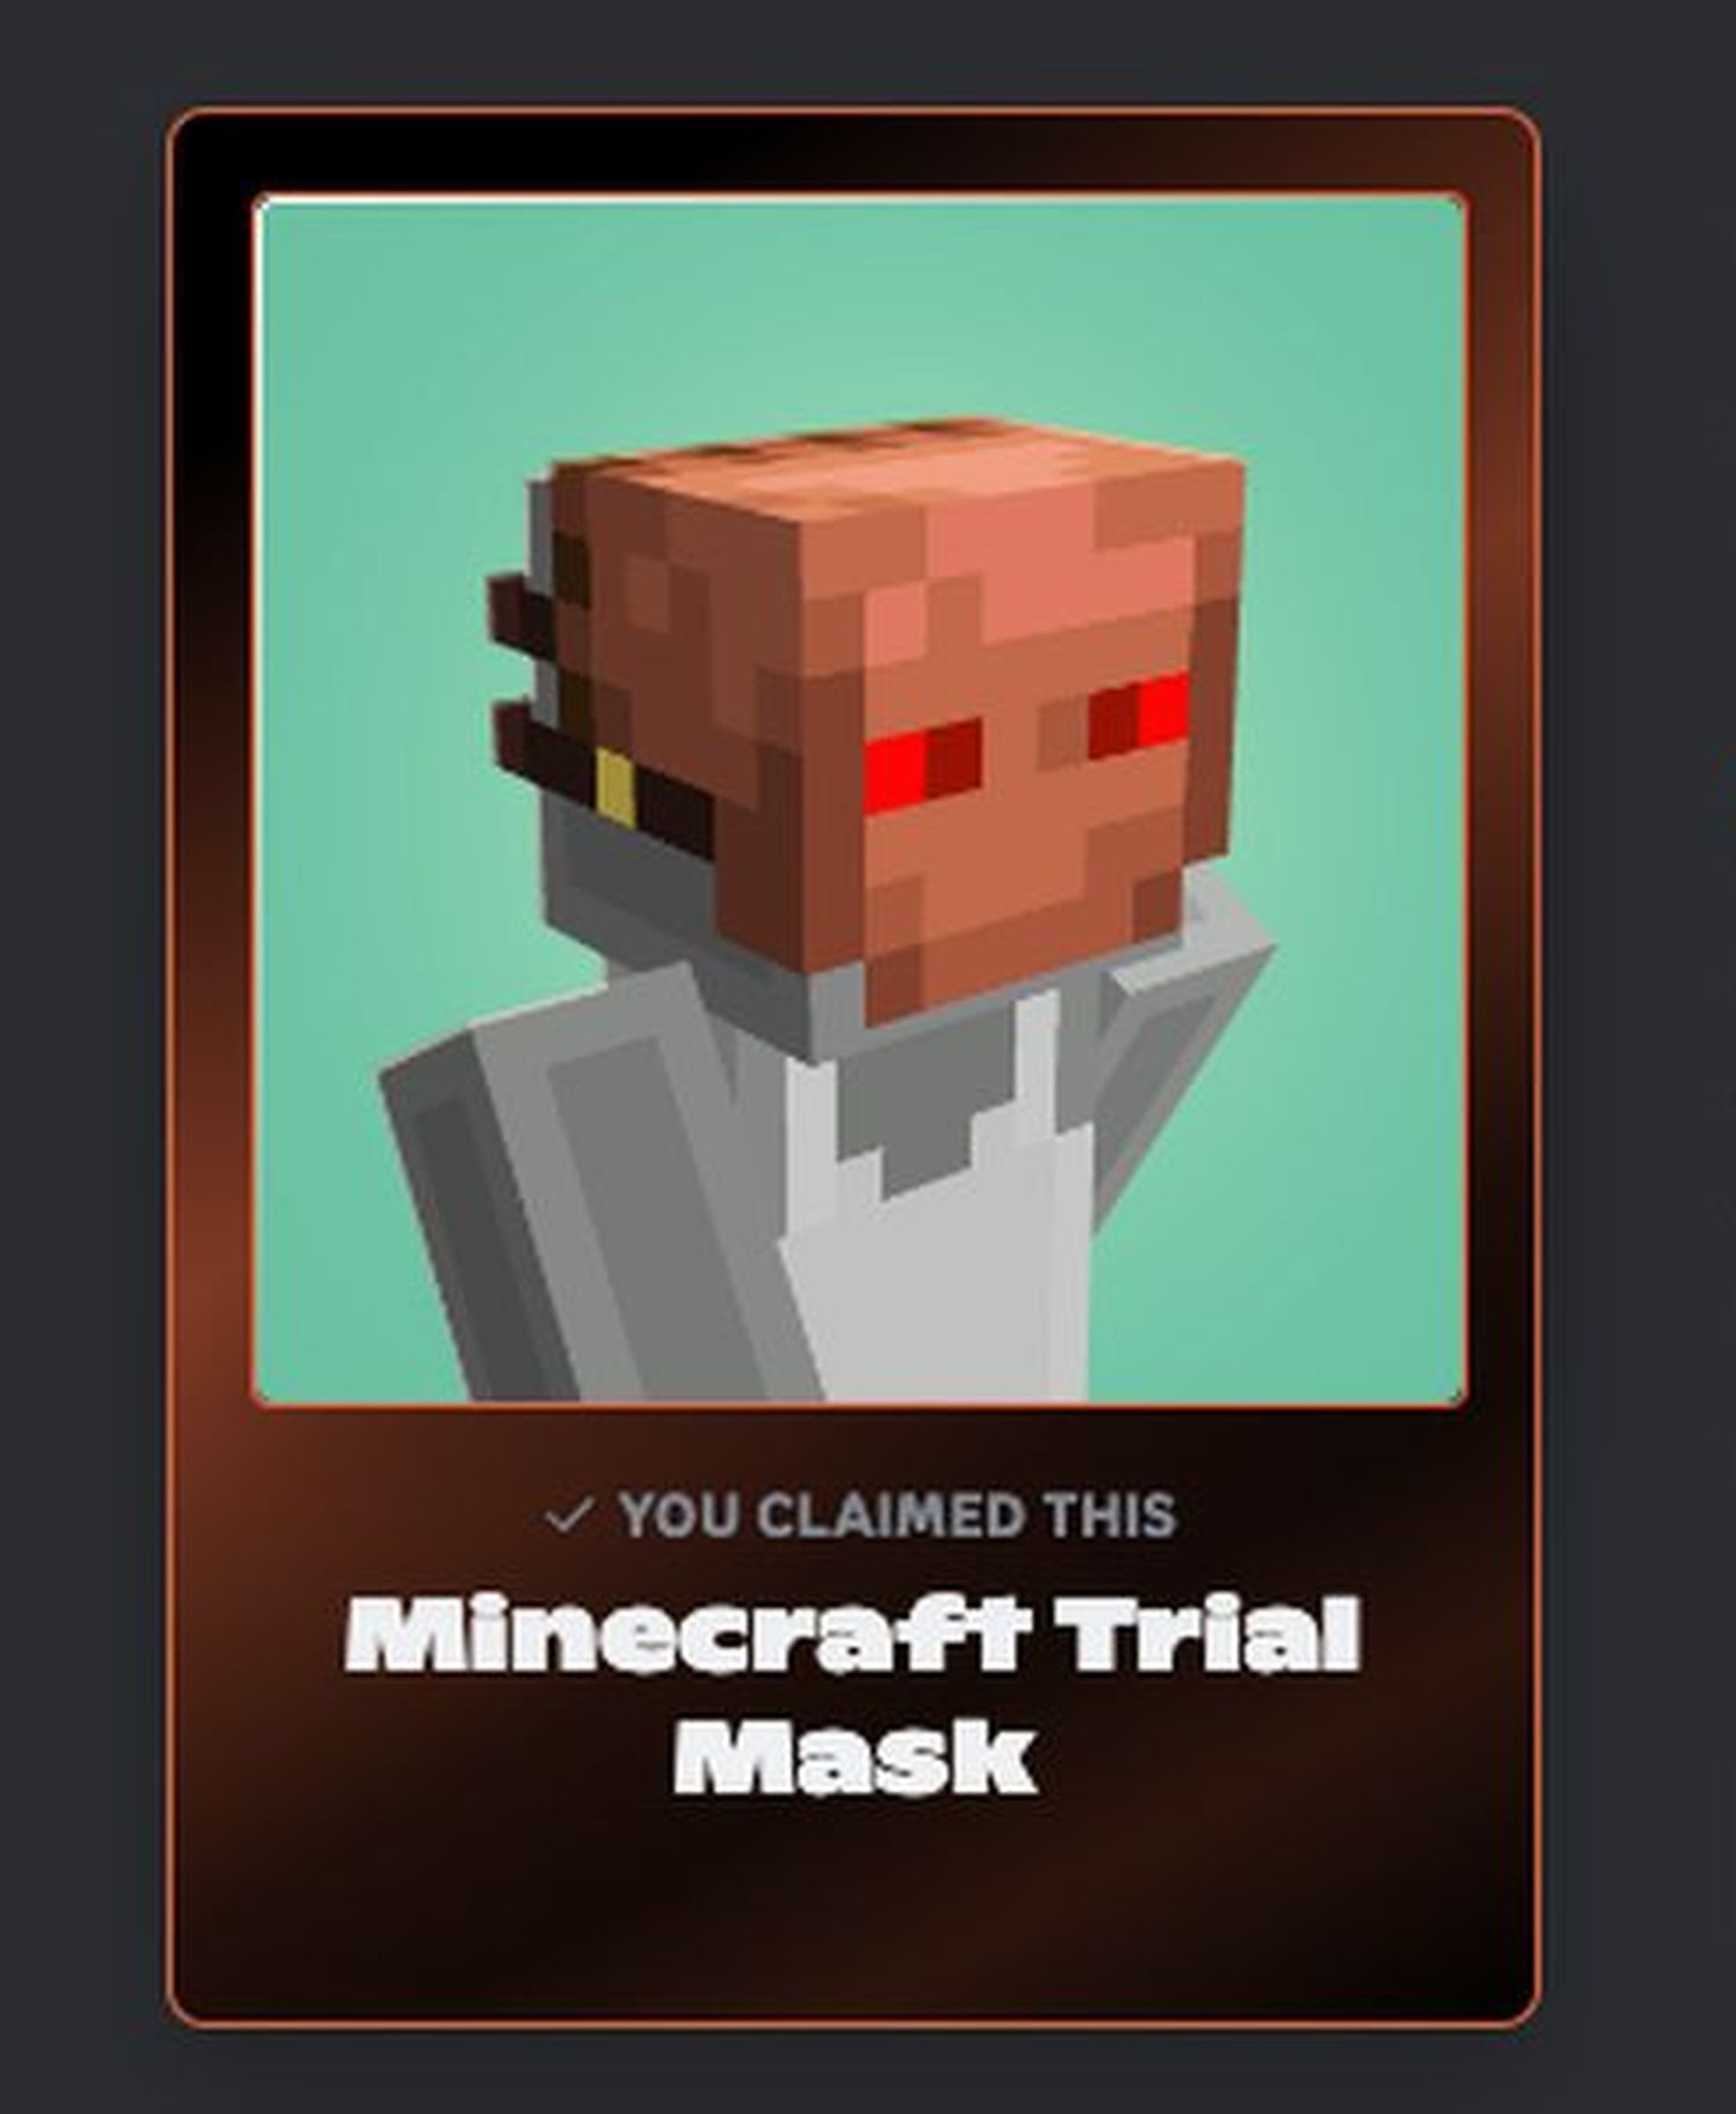 How to get Discord Minecraft Trial Mask in 6 easy steps